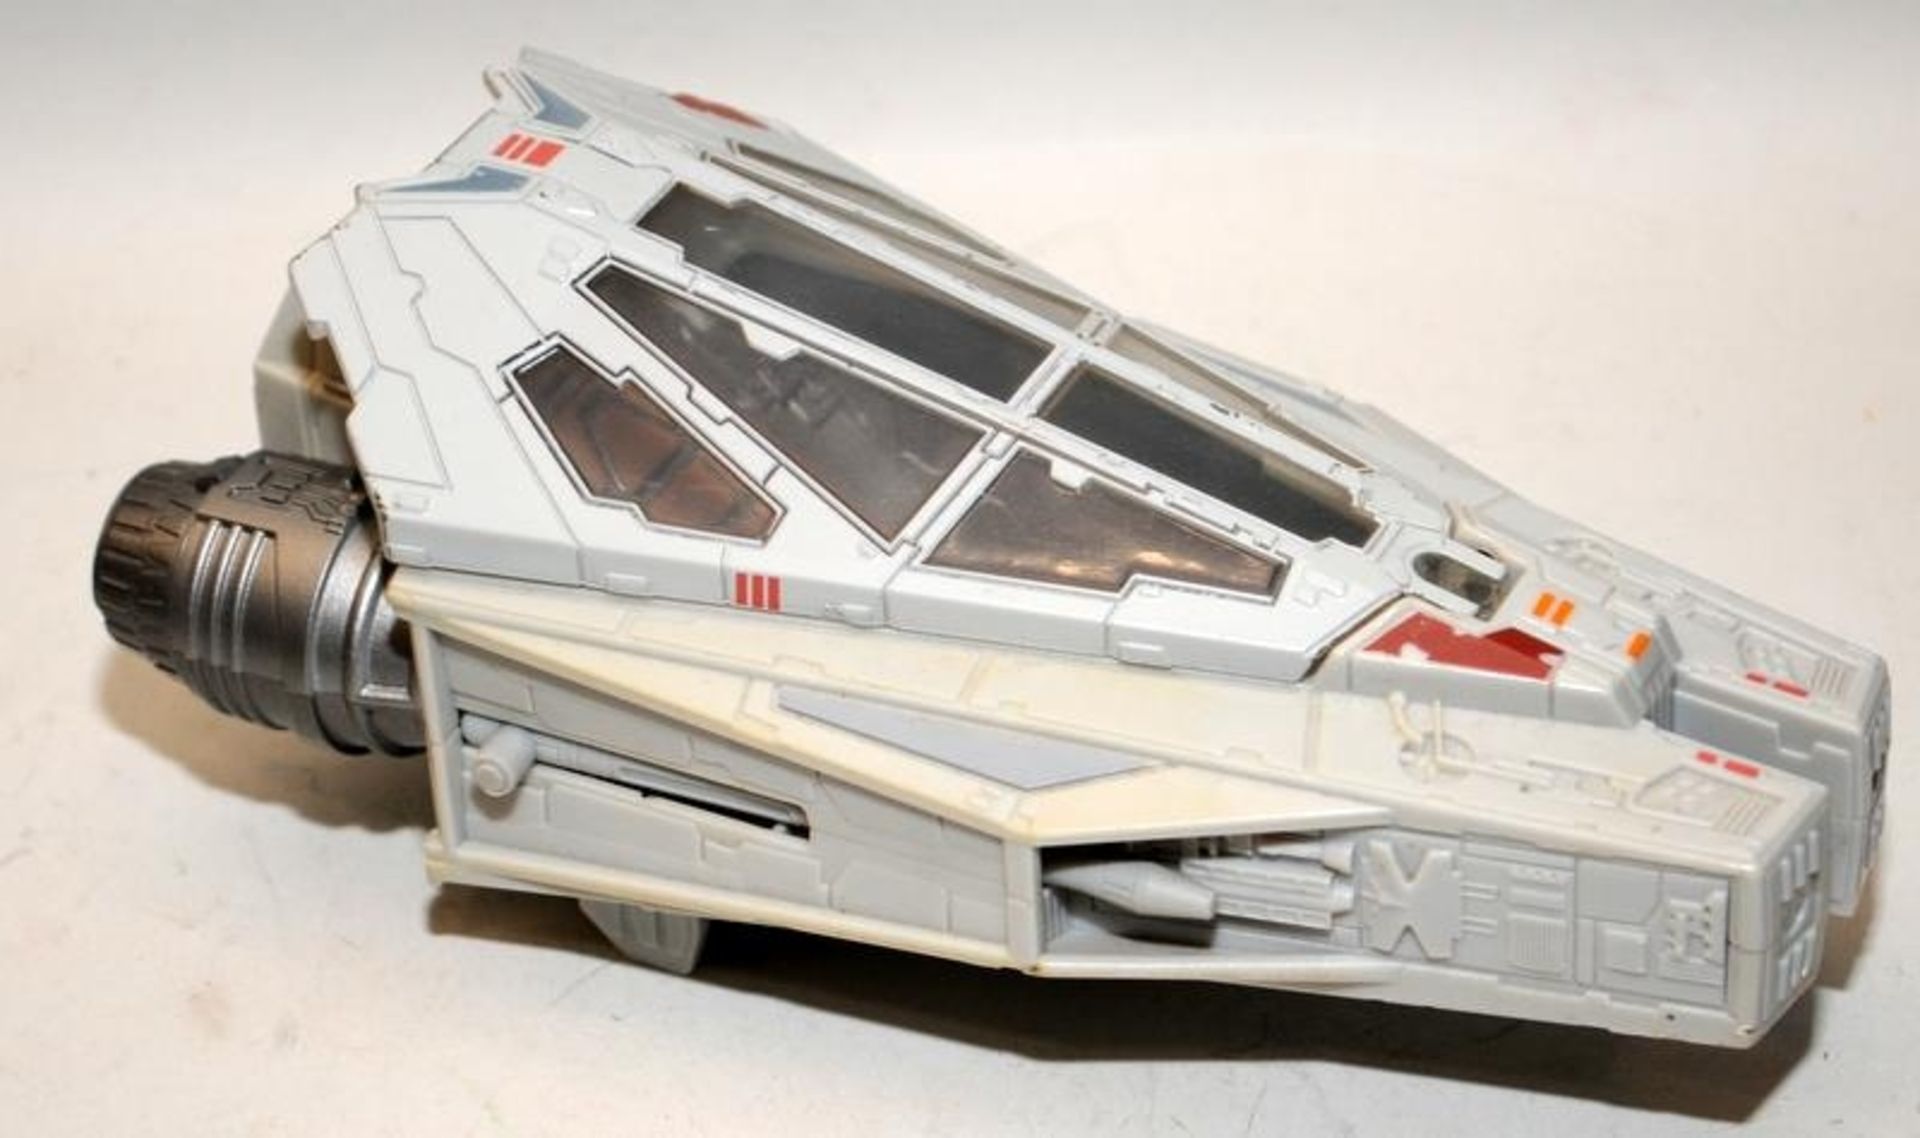 Hasbro Legacy Star Wars Millennium Falcon. Large Scale detailed model, mostly complete but missing - Image 7 of 8